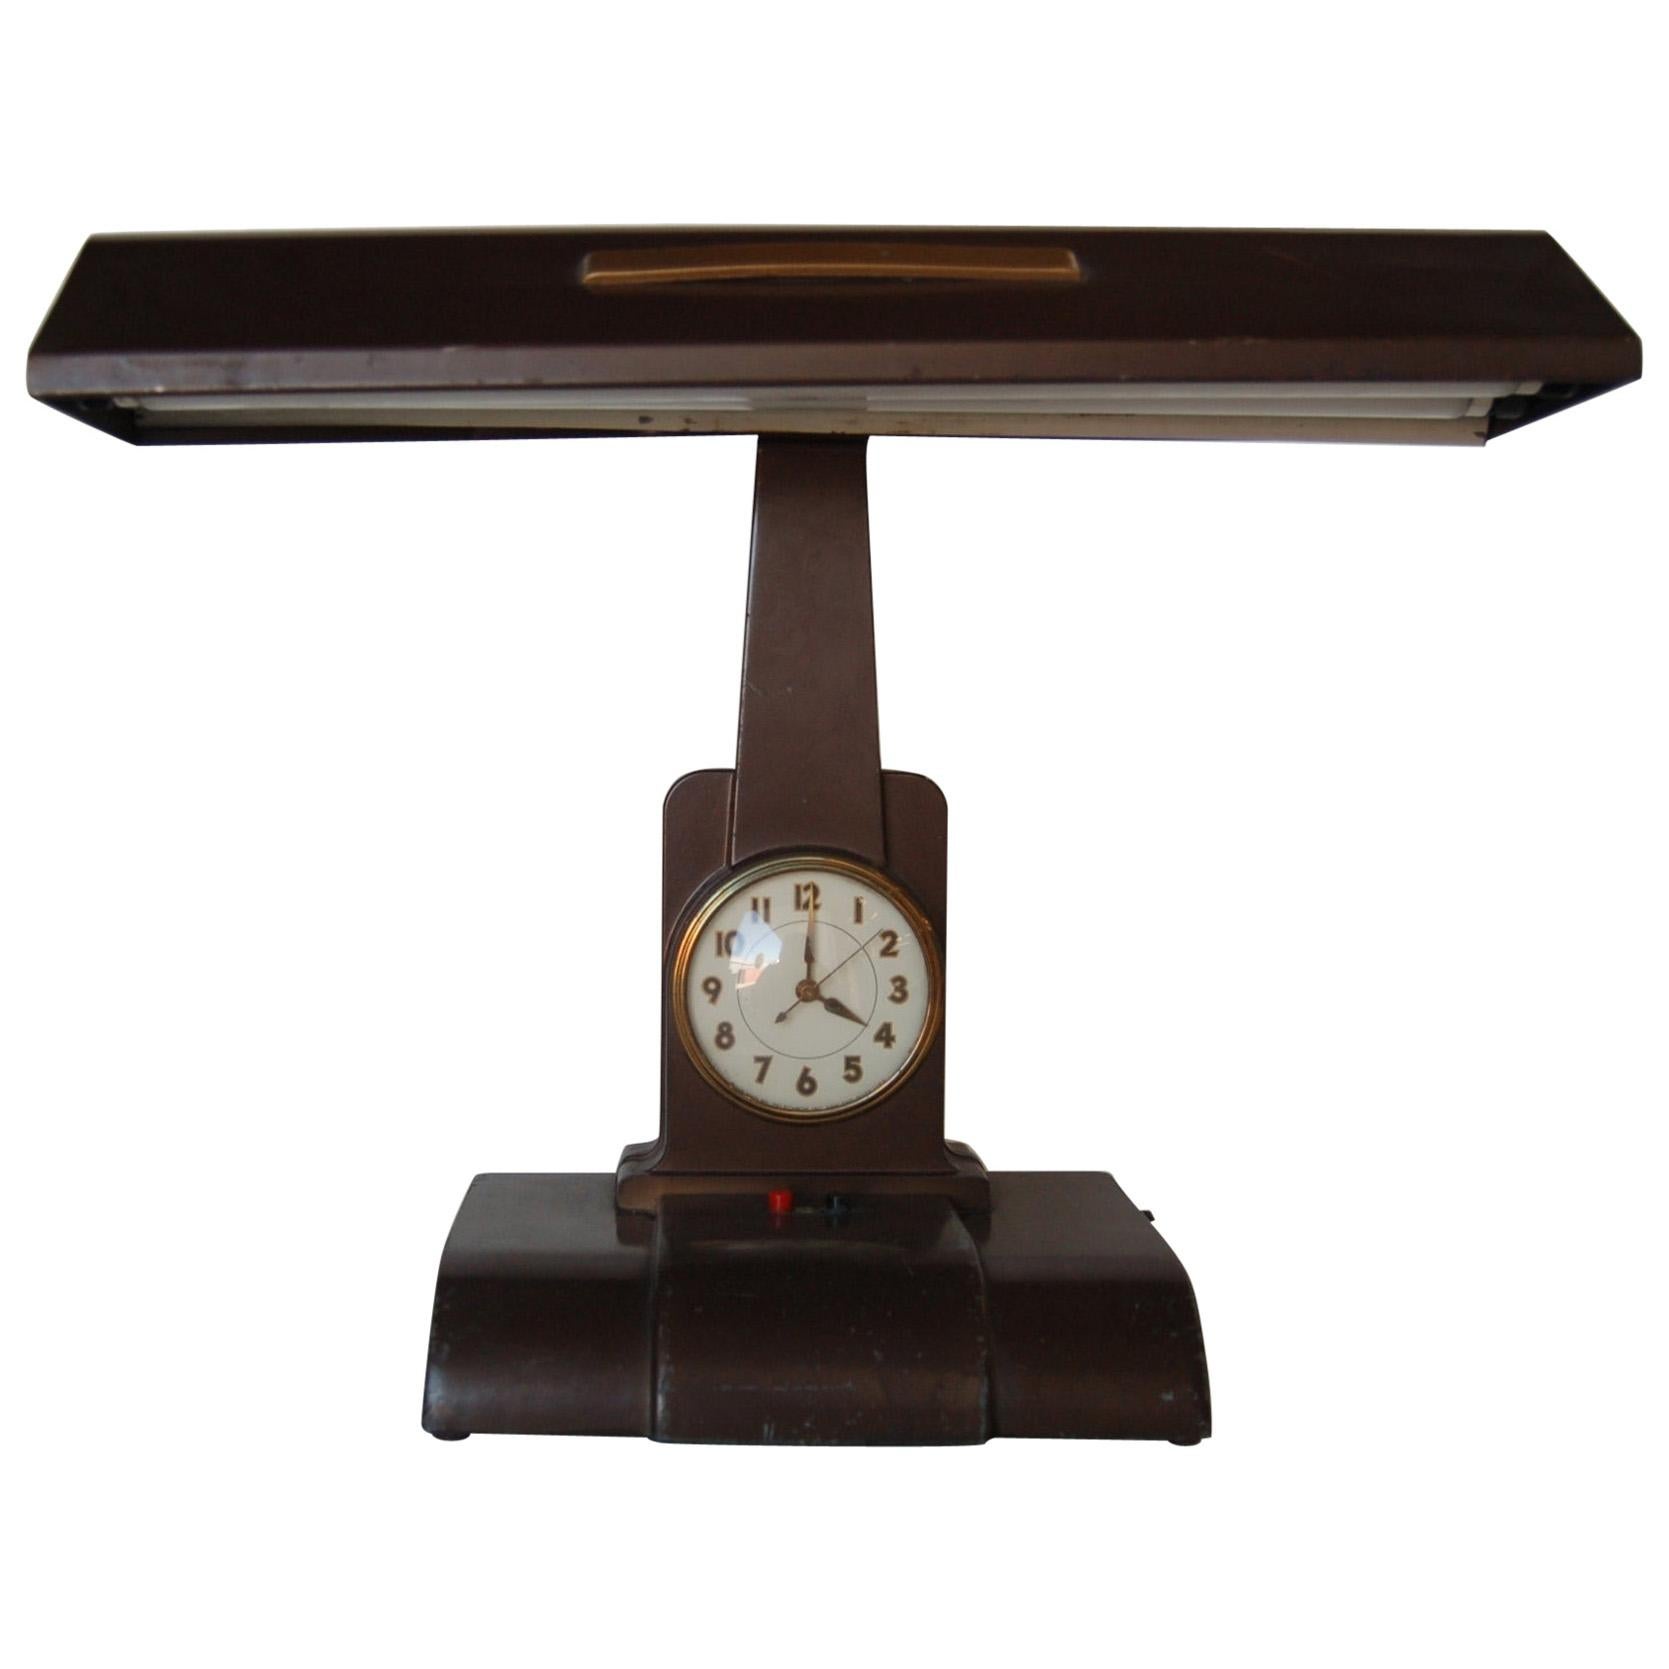 Post War Fluorescent Desk Lamp with Clock by Telechron